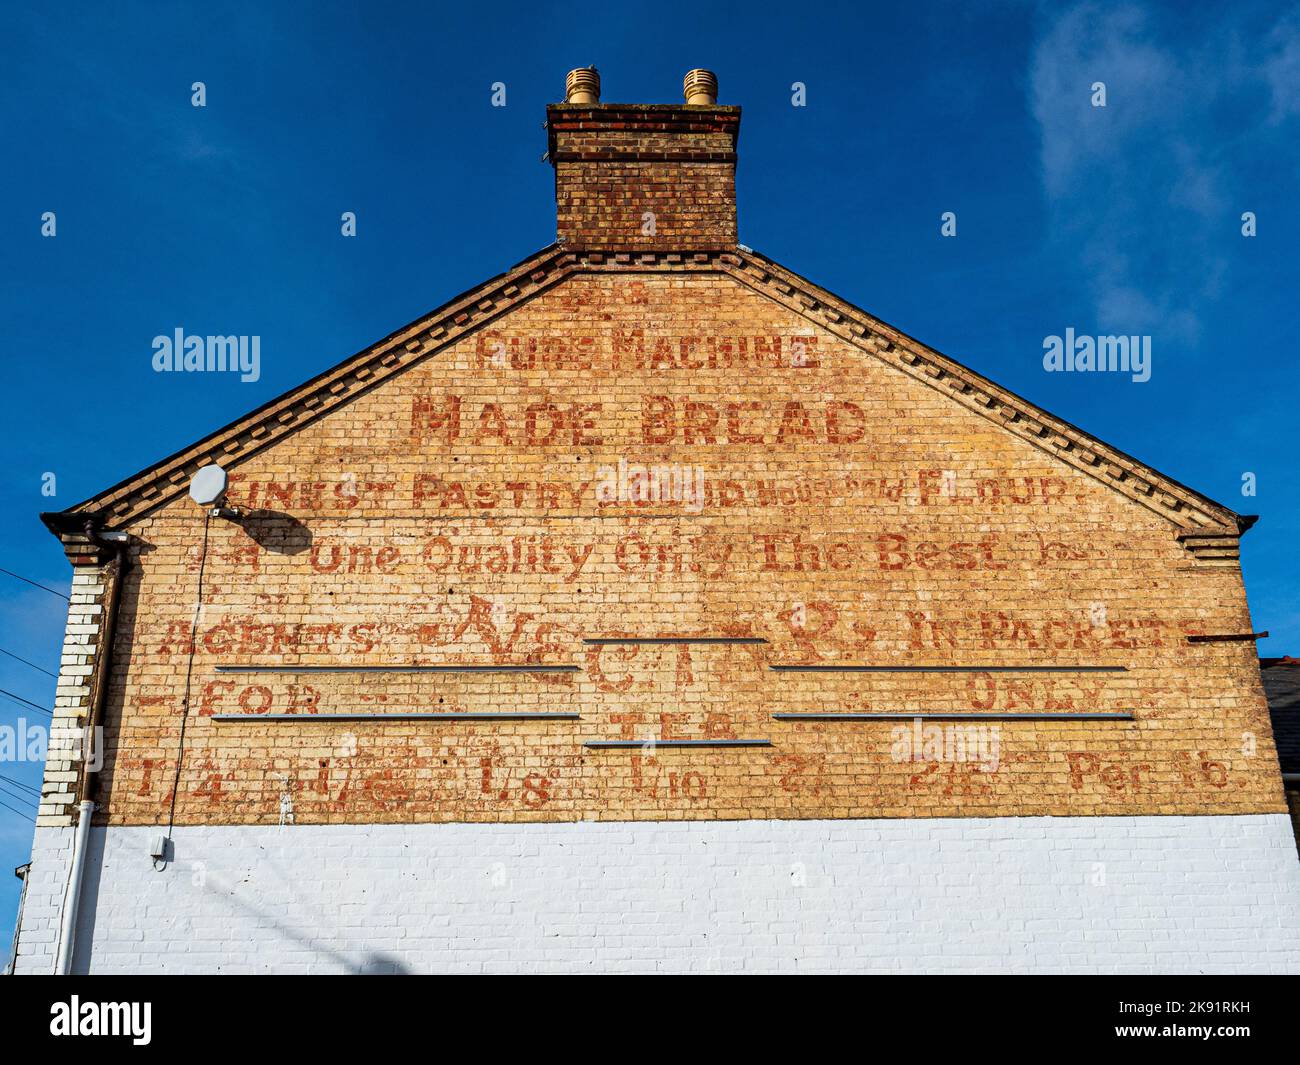 Ghost Signs. Ghostsigns. Vintage gable end signs in Cambridge UK. Bakery Ghost sign on a building in Cambridge UK for machine made bread & Nectar Tea. Stock Photo